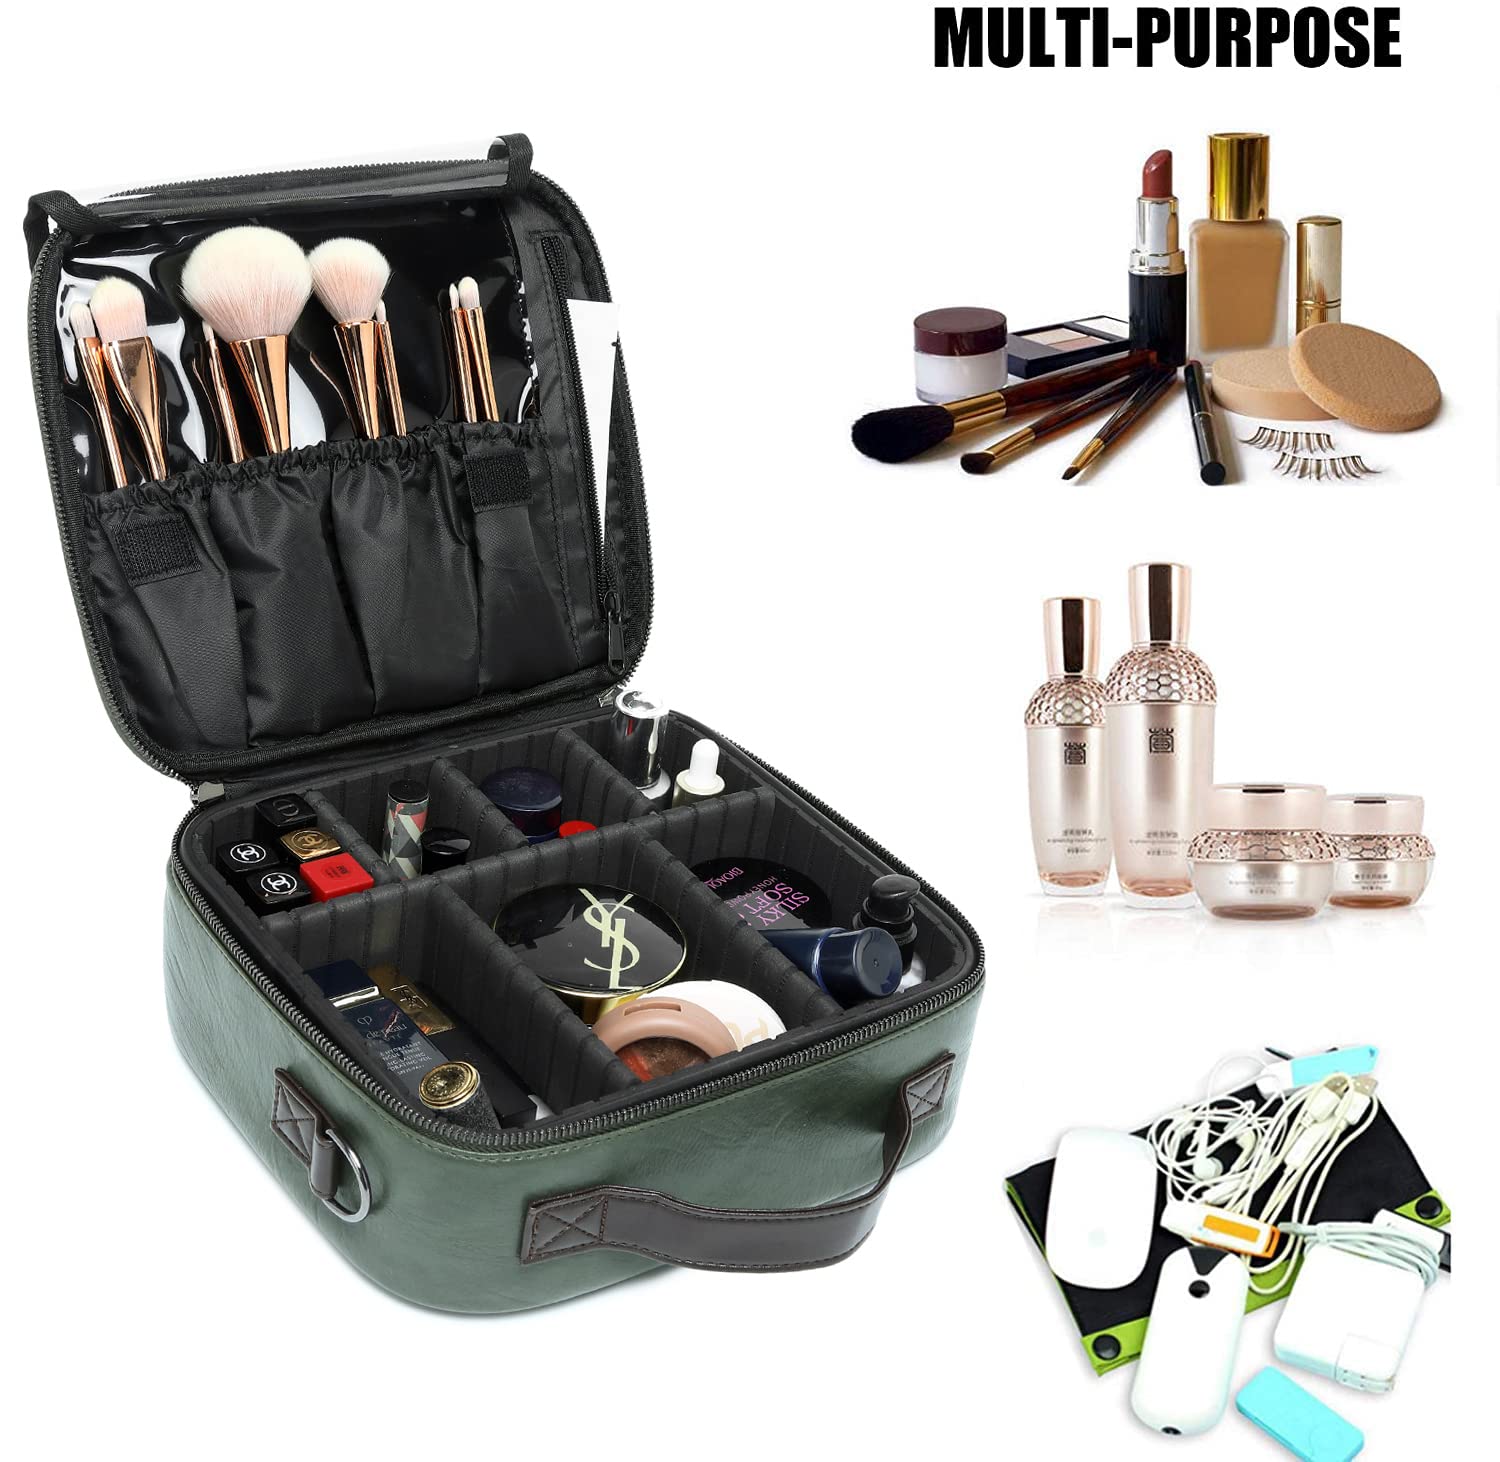 LACATTURA Travel Makeup bag, Leather Makeup Train Case Cosmetic Organizer for Makeup Brushes Toiletry Digital Accessories, Portable Artist Storage Bag With Shoulder Strap for Women lady Green